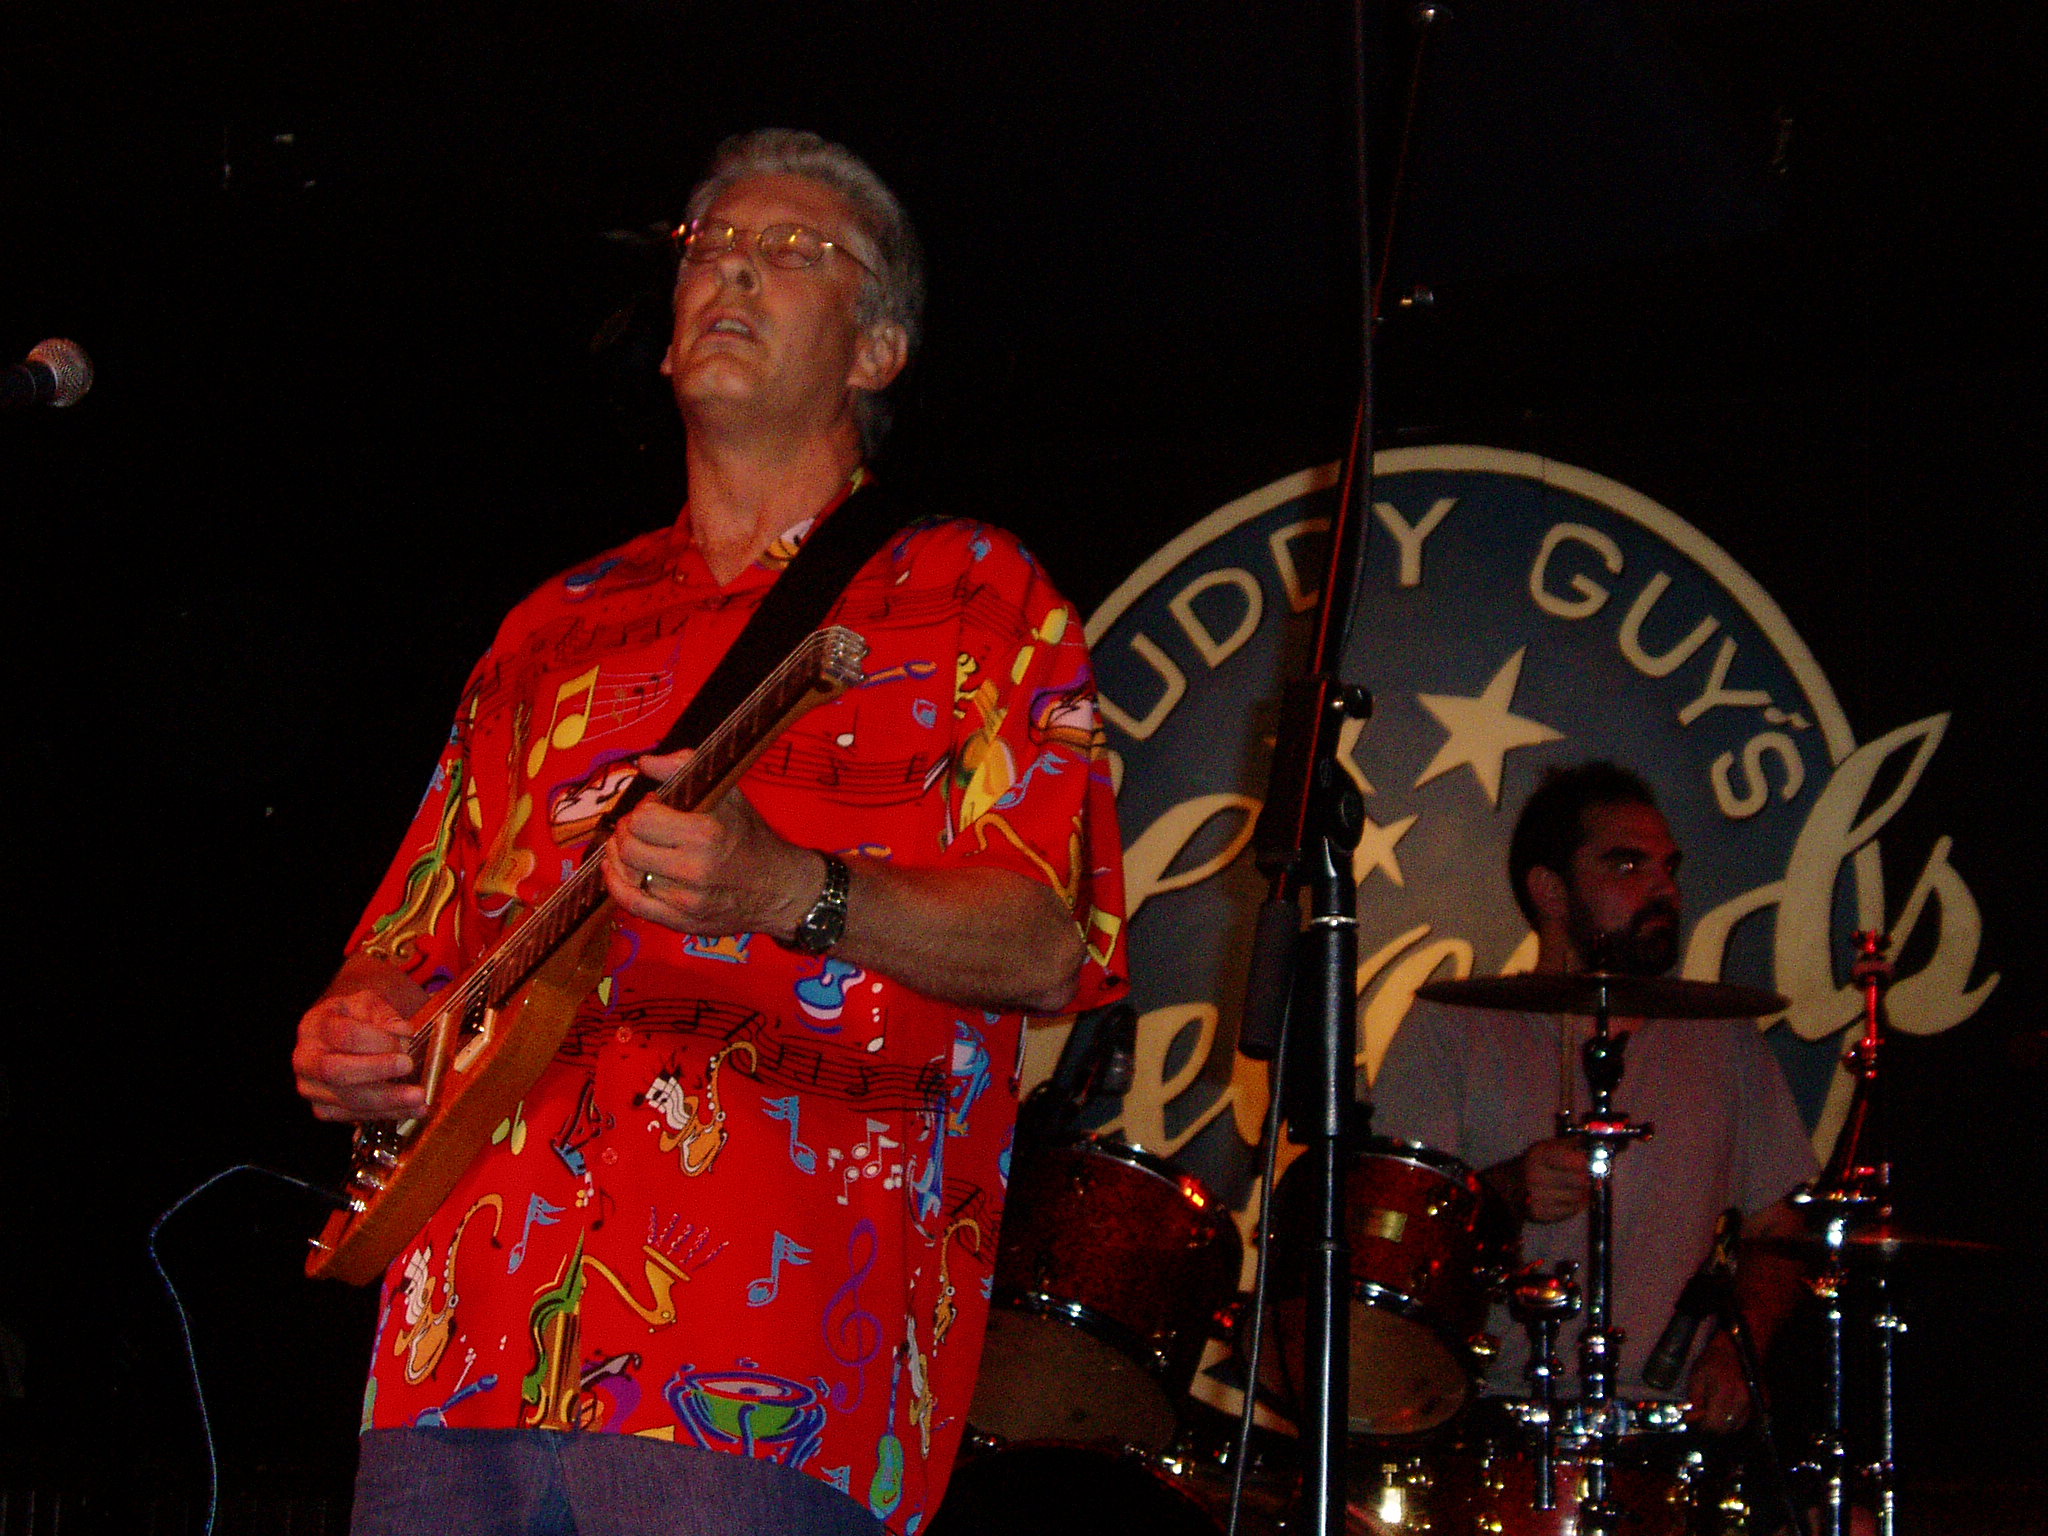 Russ ron stage with his Rambler at Buddy Guy's Legends